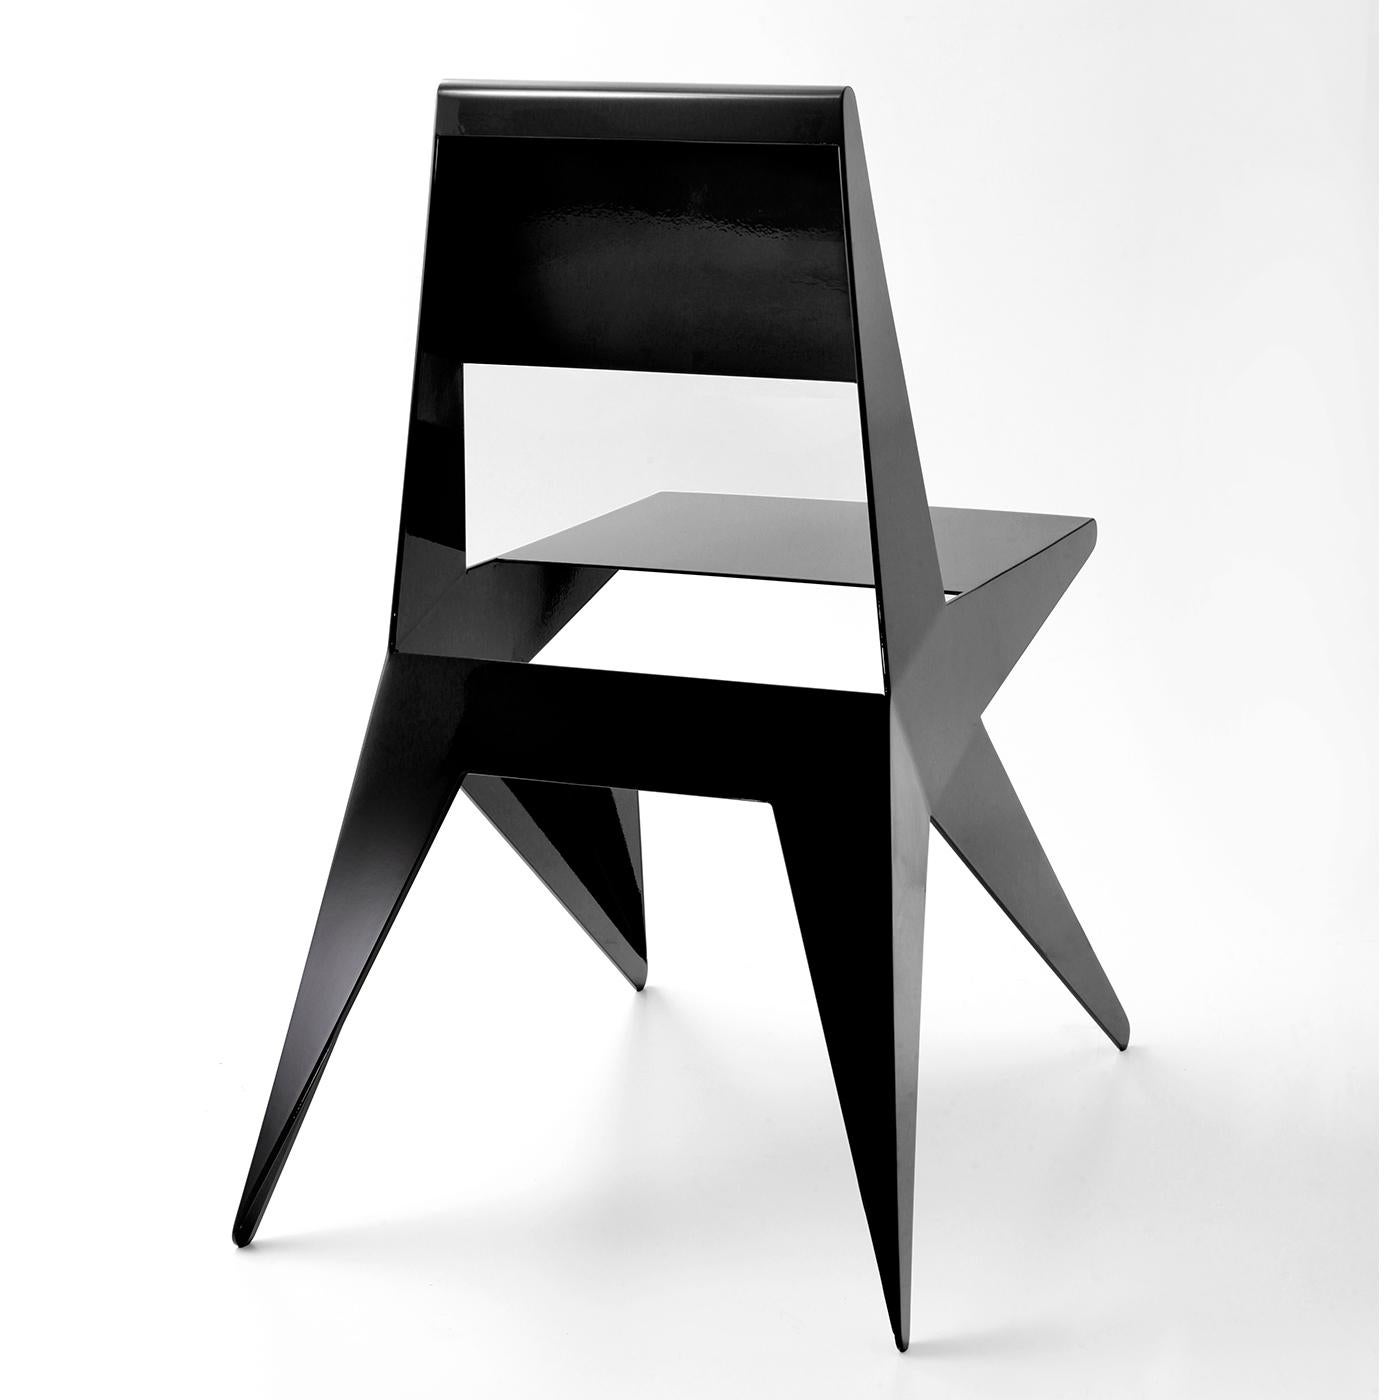 Bent, welded, and finished entirely by hand, this unique chair features an angular Silhouette crafted using a thin aluminum sheet. Legs, seat, and back extend from a core like the points of a star. The black lacquered finish enhances the bold look